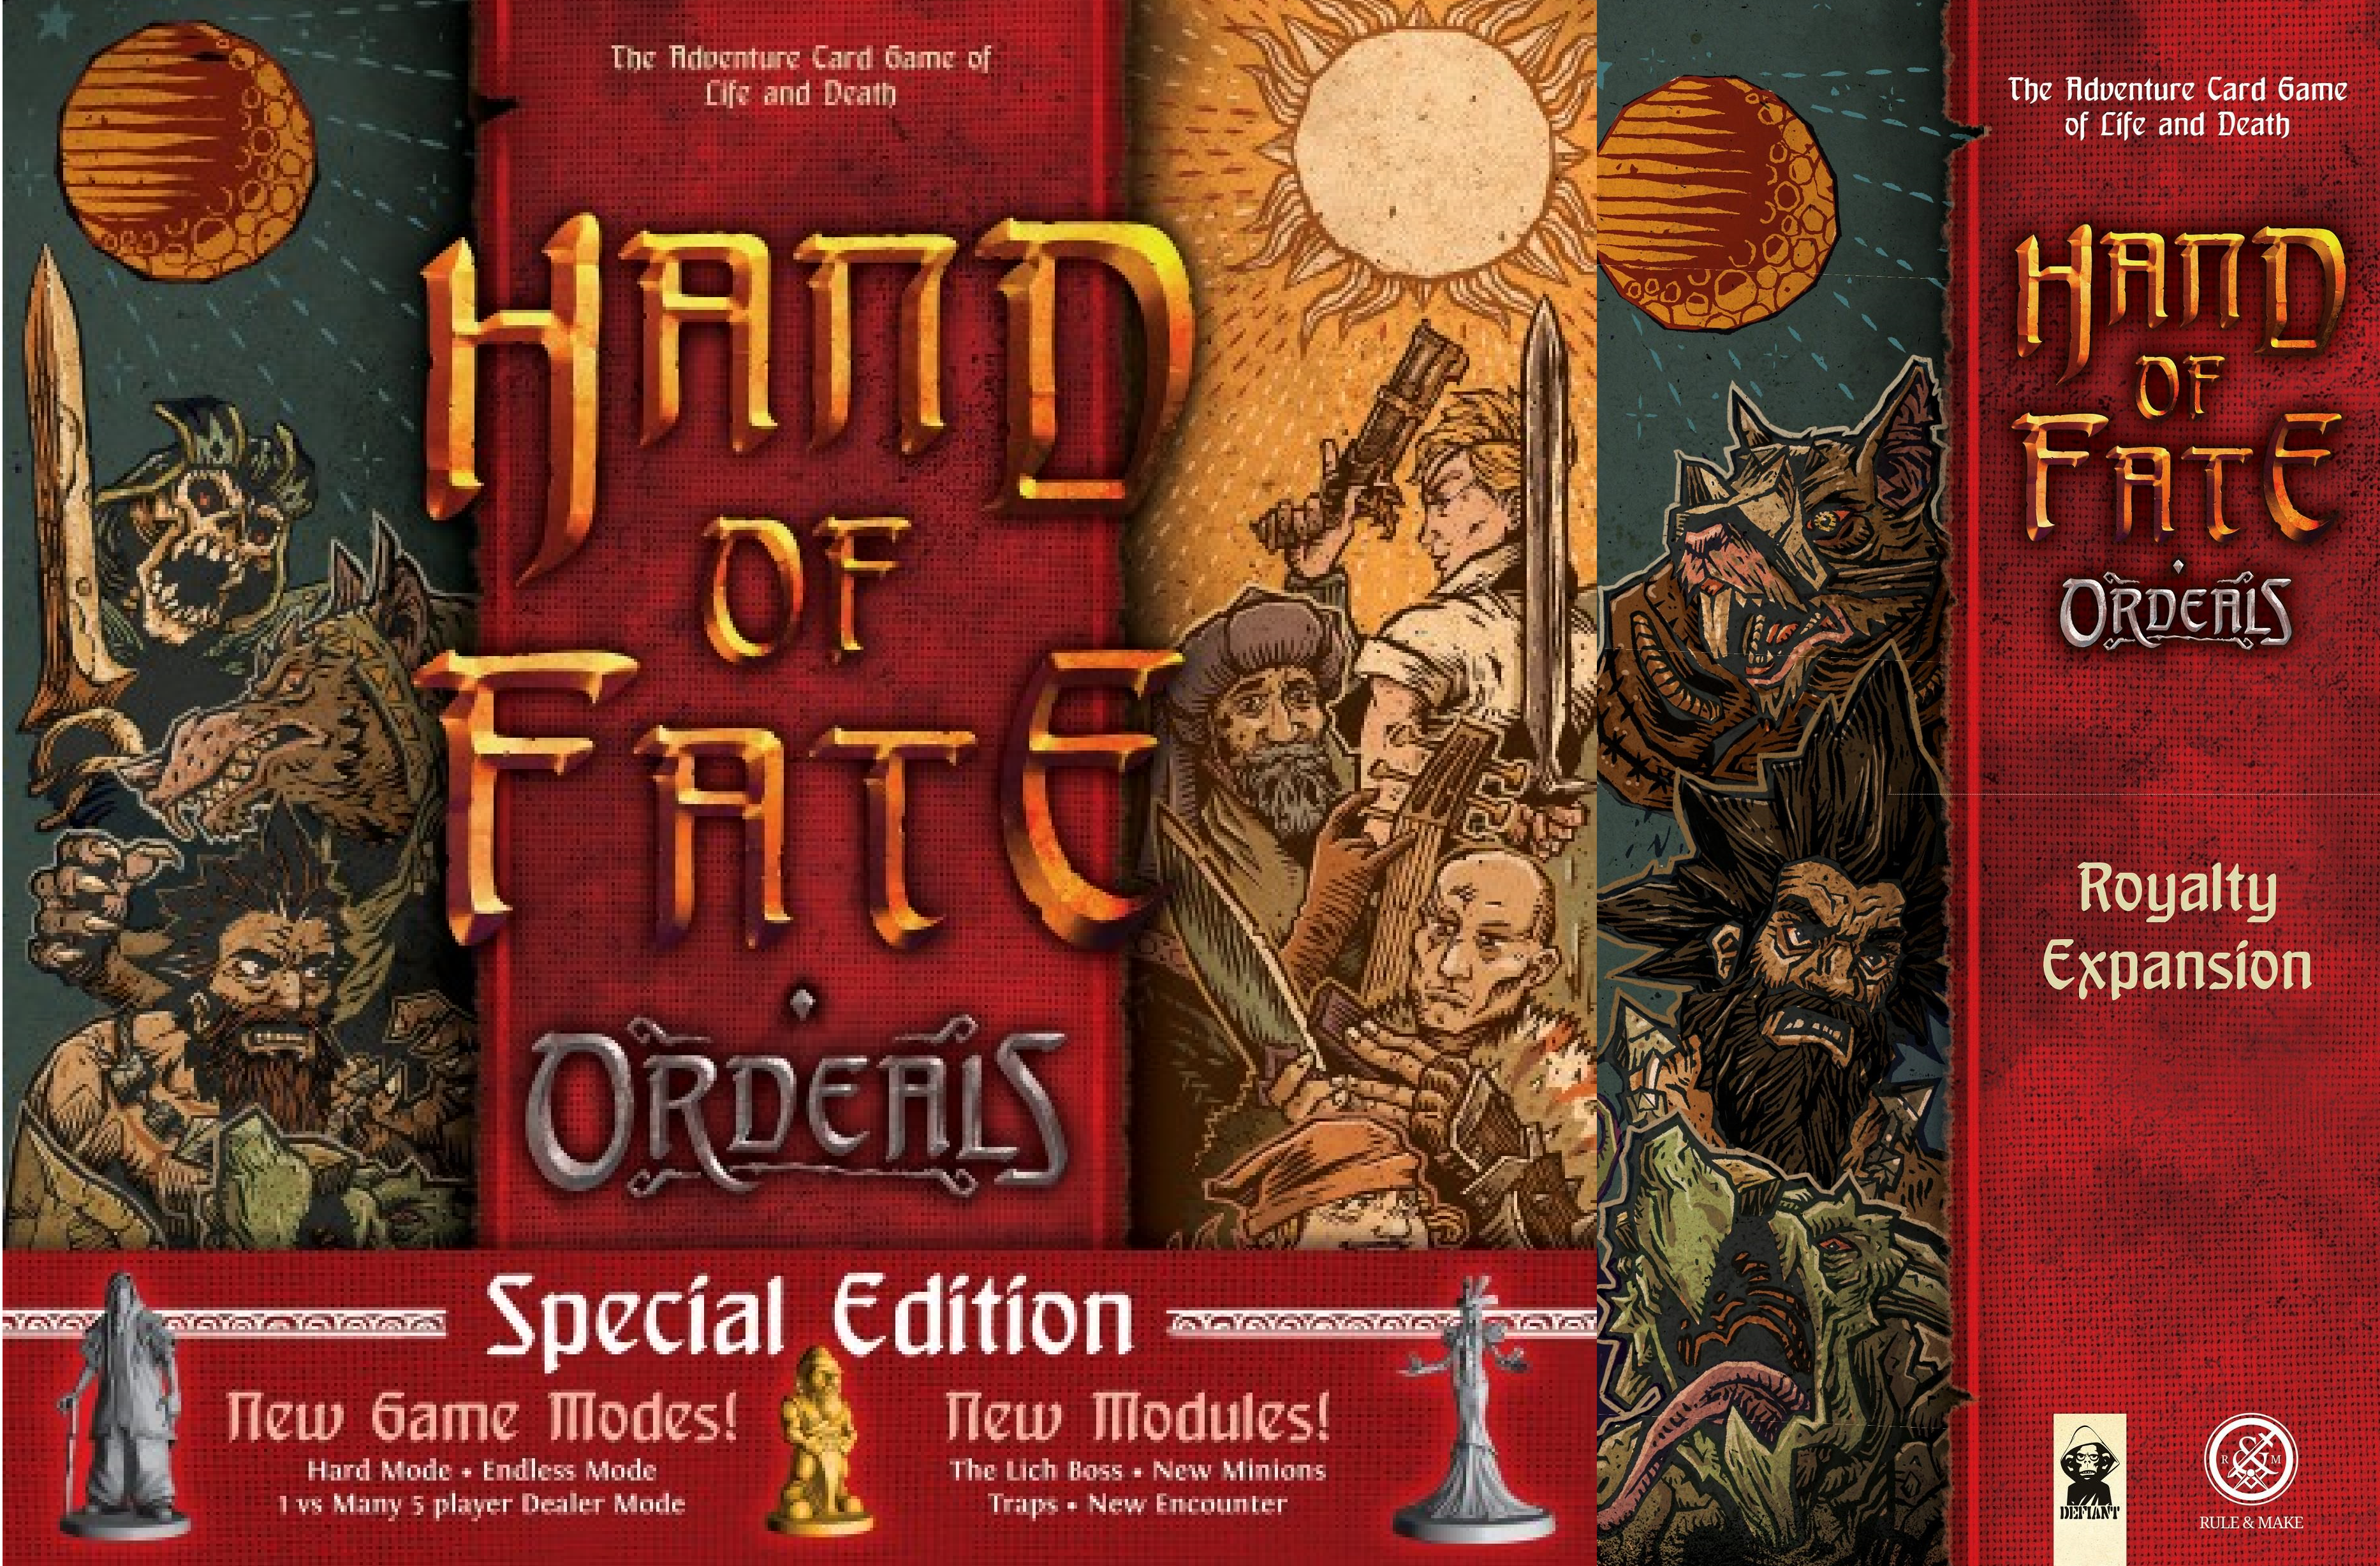 Hand Of Fate Ordeals Royalty Expansion BRAND NEW